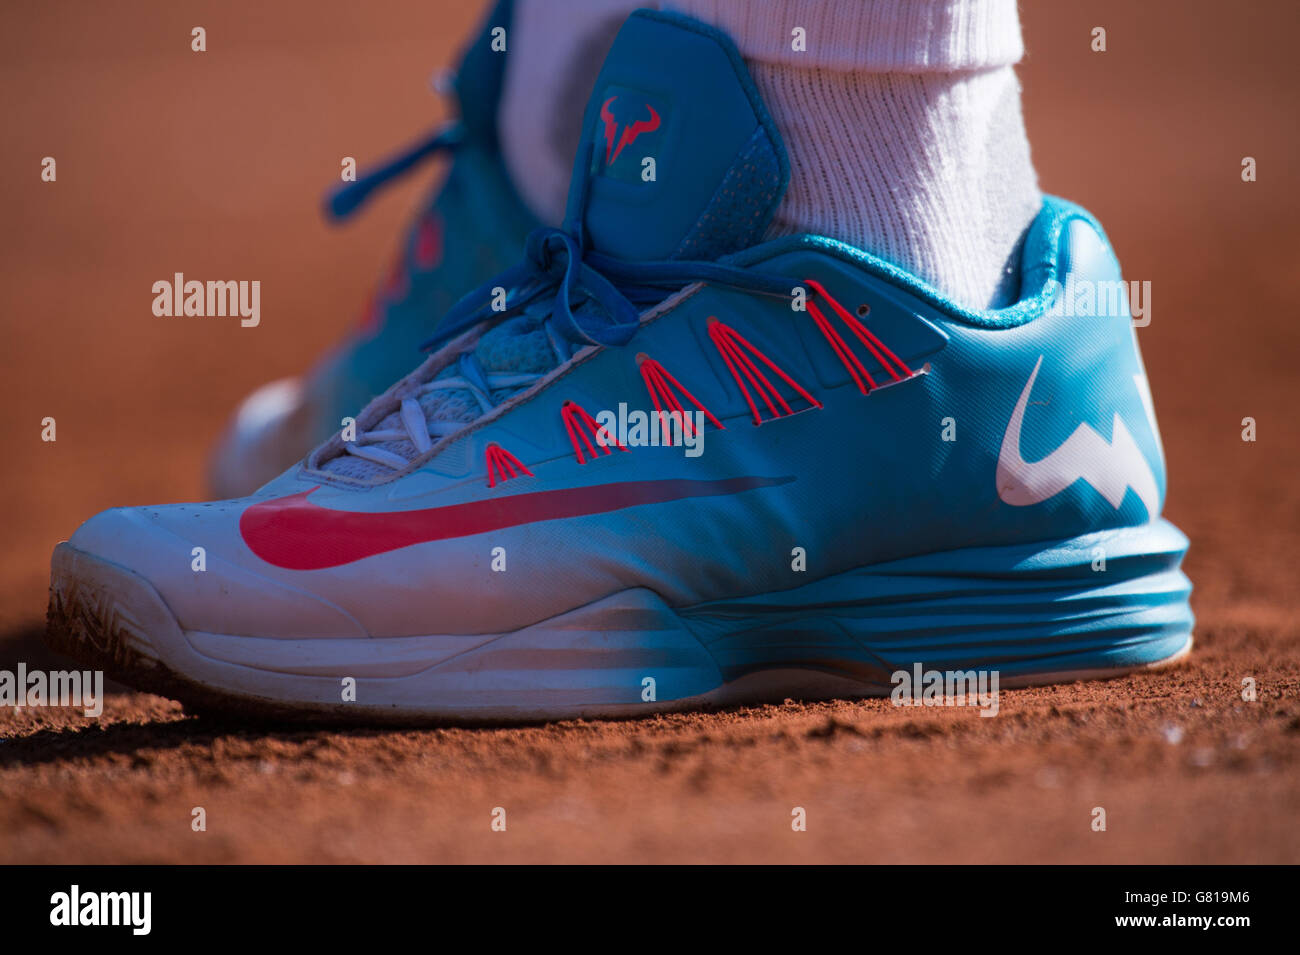 Nike Shoes 2015 High Resolution Stock Photography and Images - Alamy